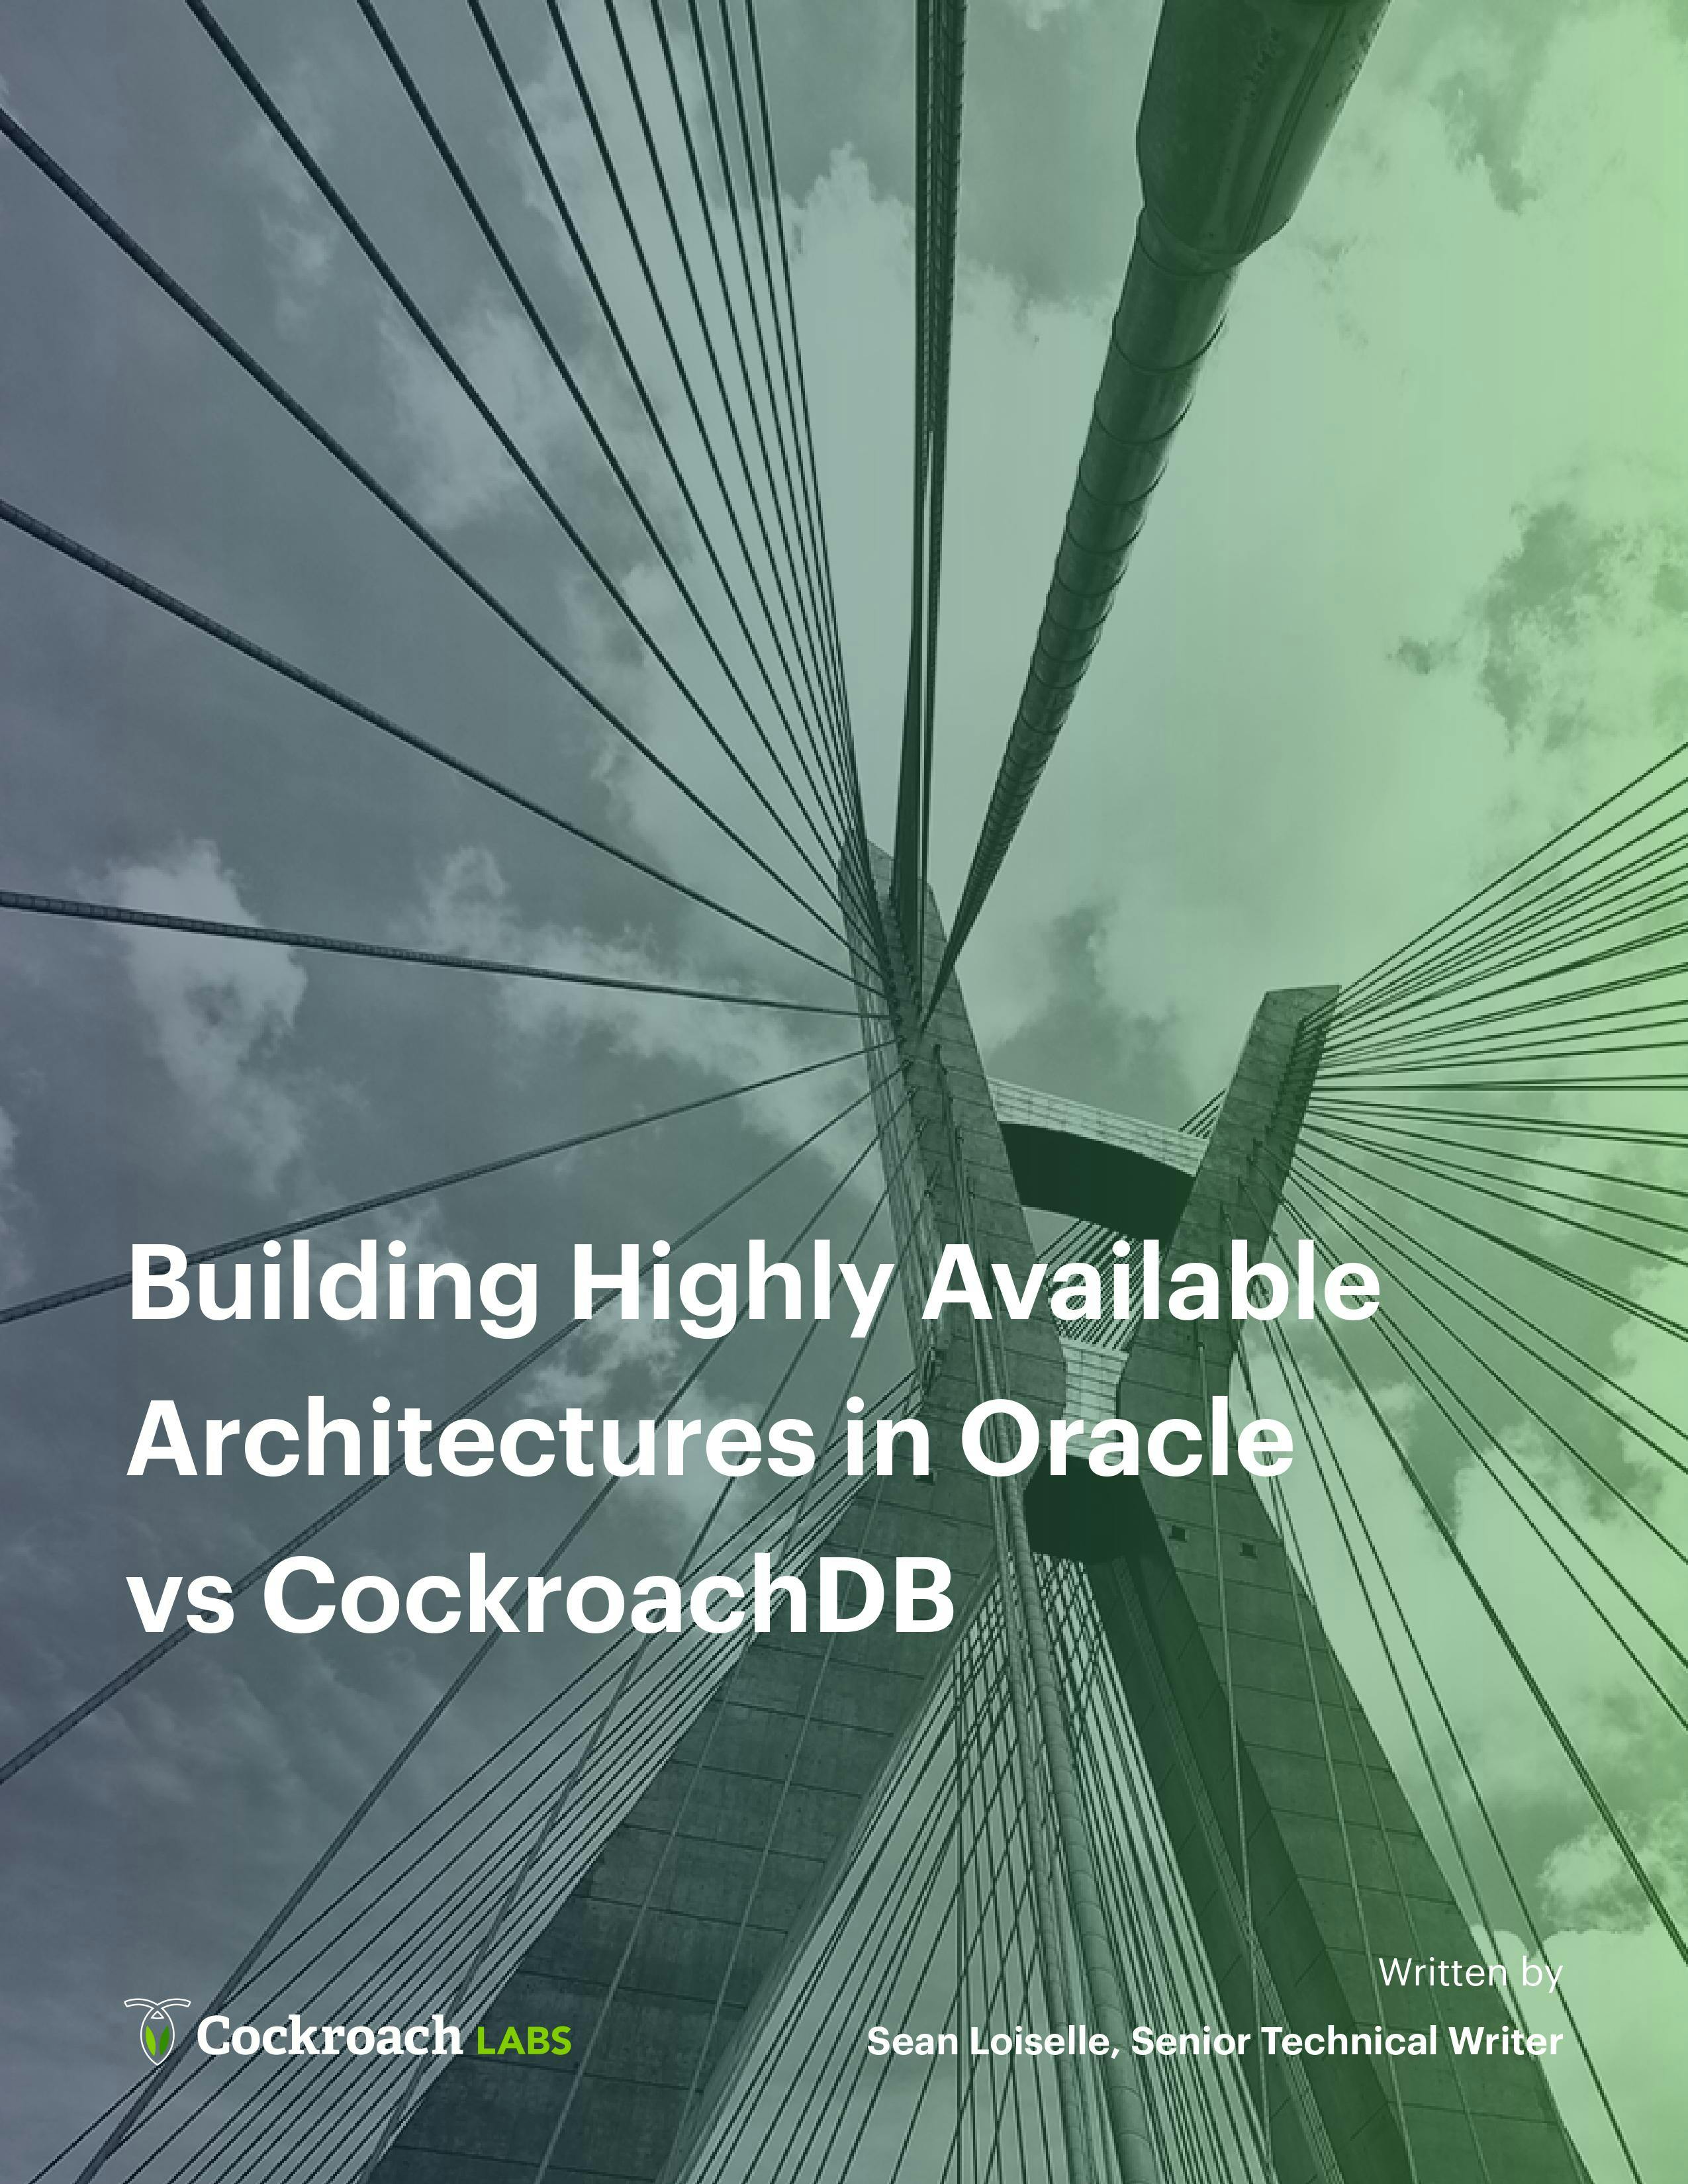 Building Highly Available Architectures: Oracle vs CockroachDB